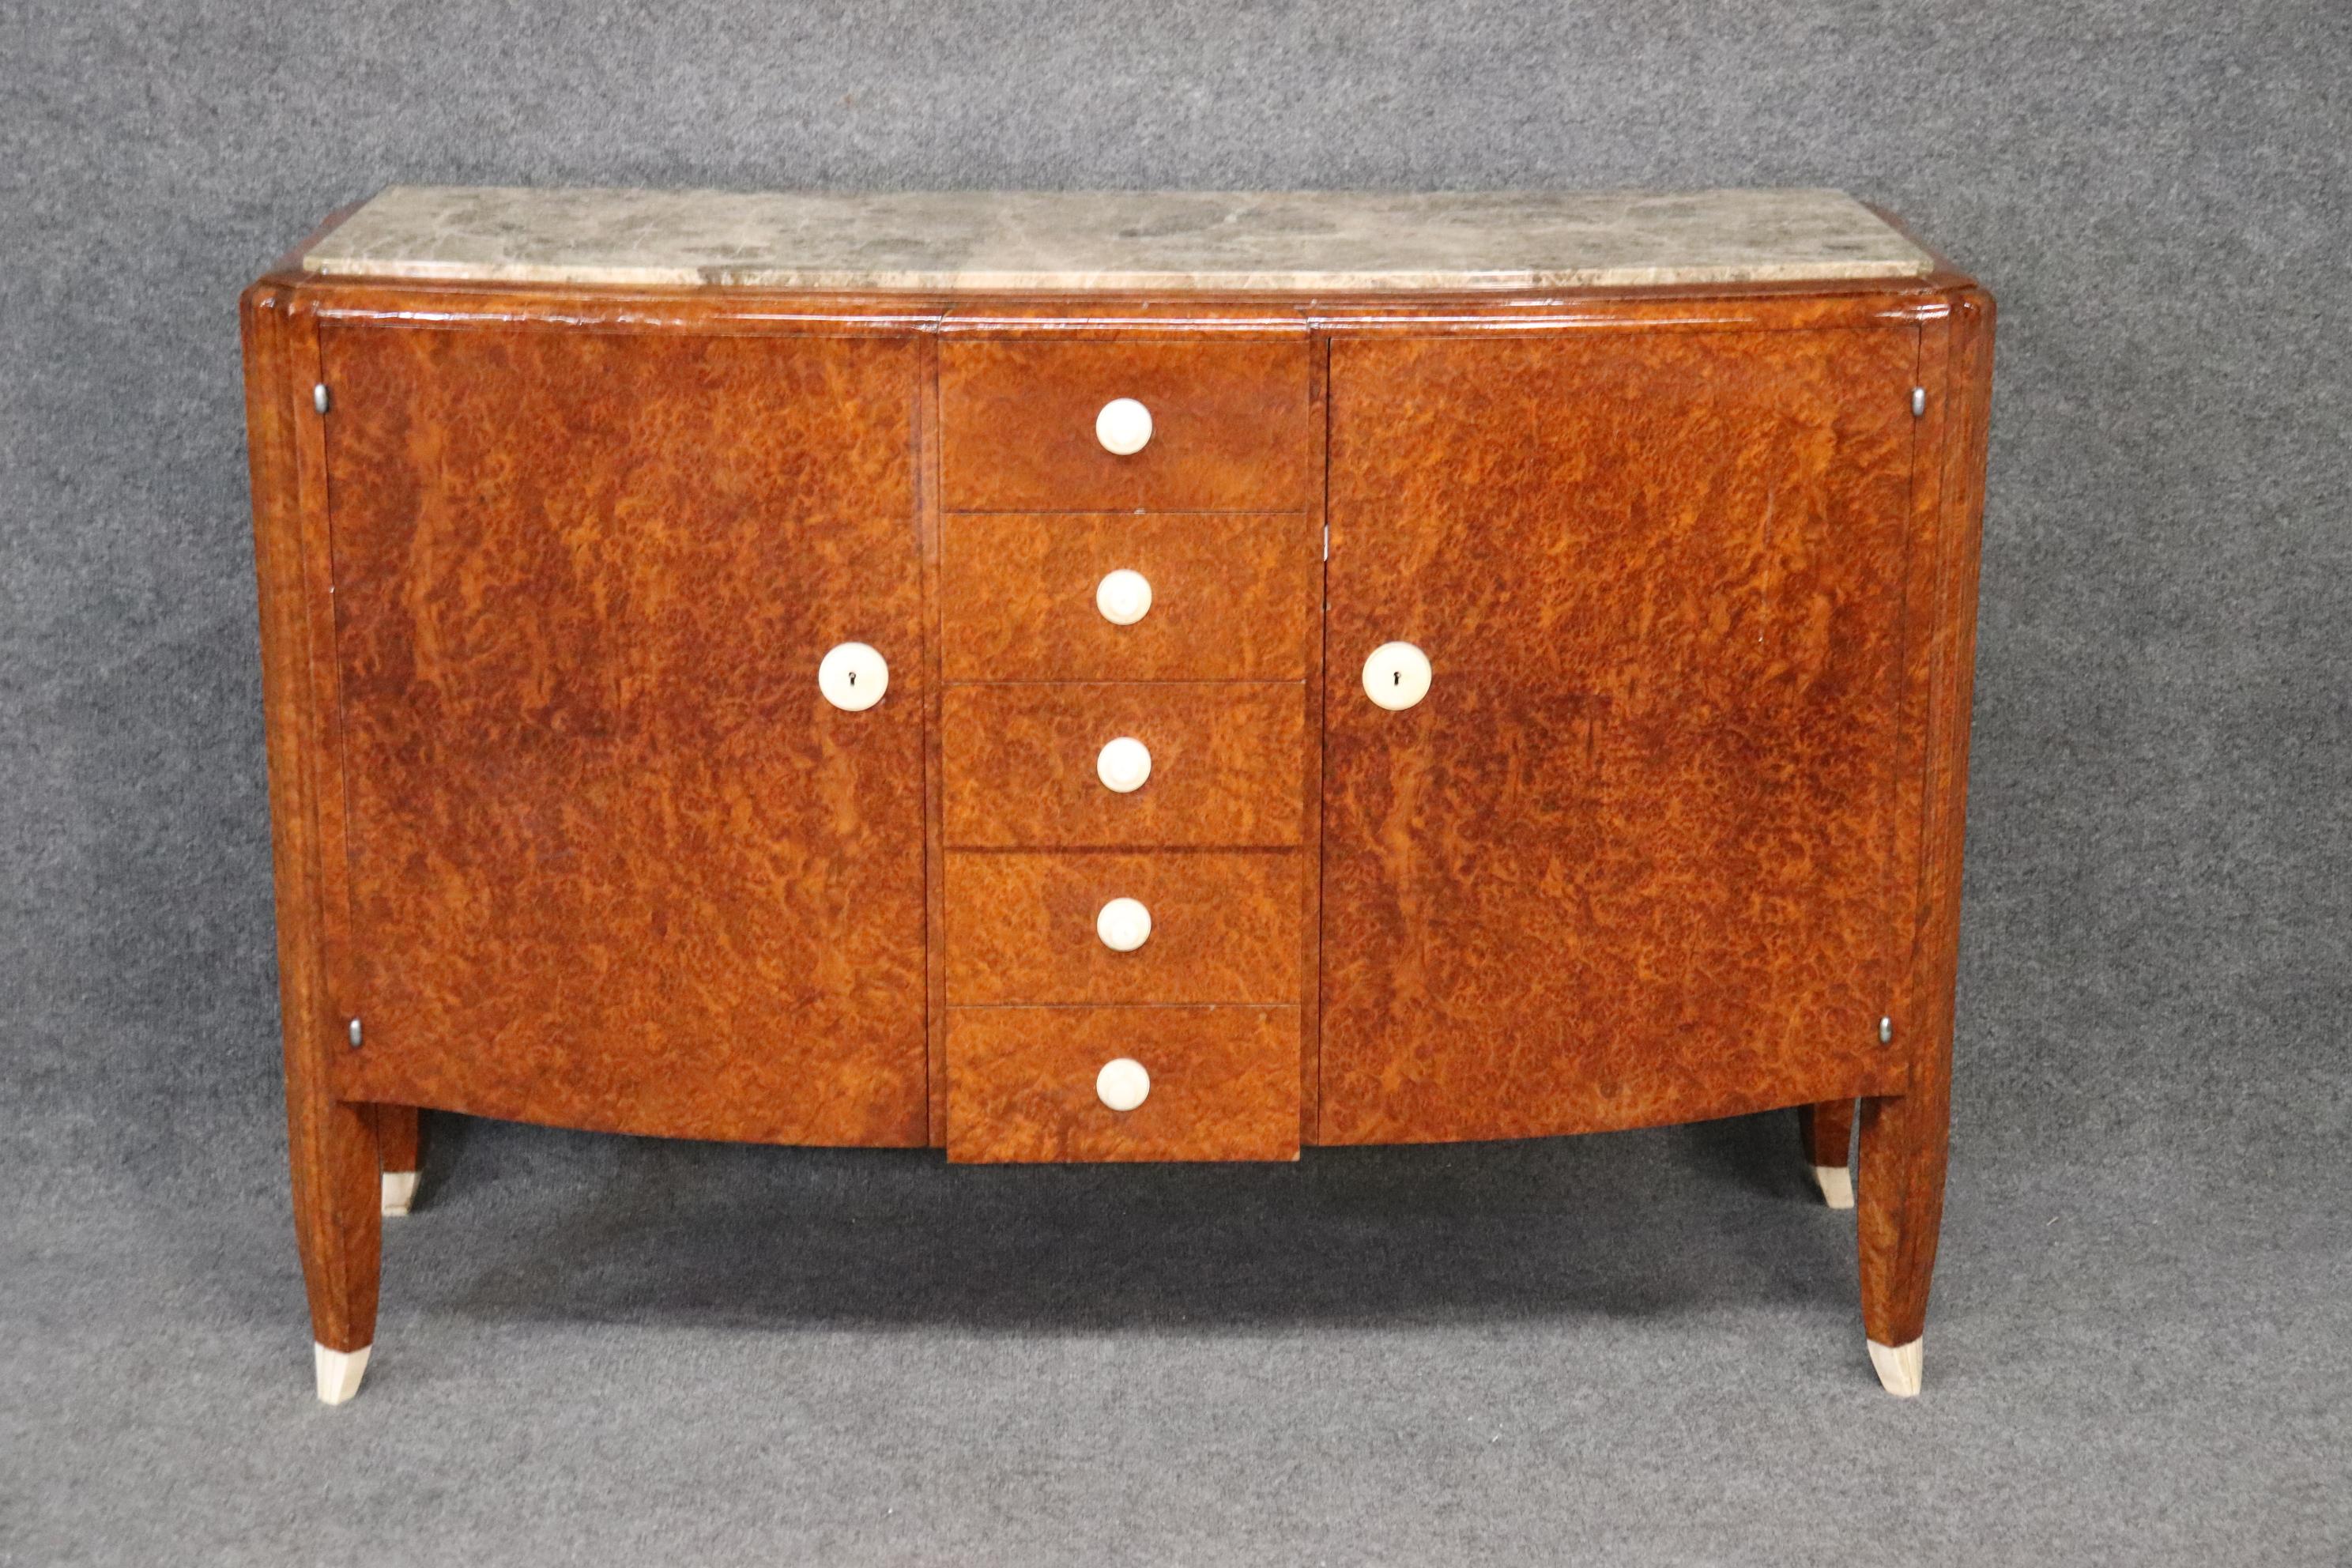 Rare Signed Francois Linke Burled Walnut Art Deco Ivory Marlble Top Sideboard In Good Condition For Sale In Swedesboro, NJ